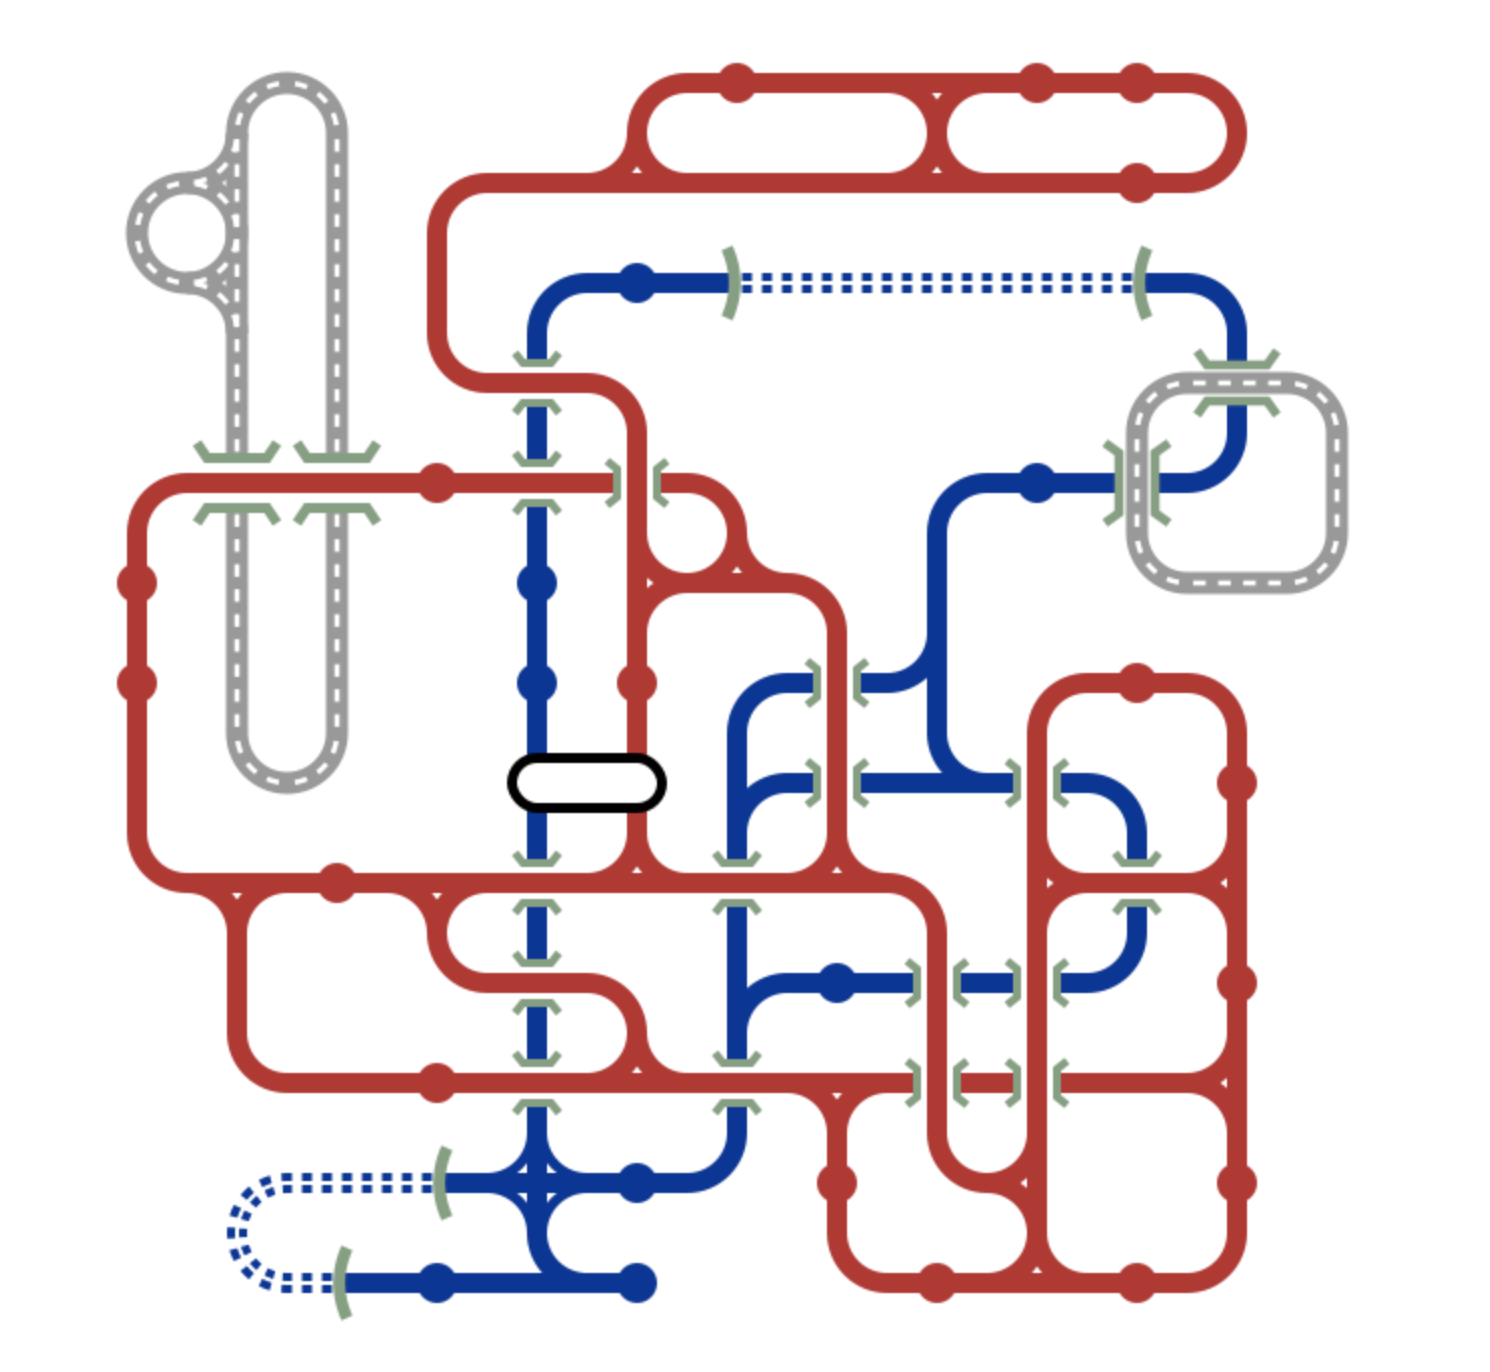 Icons placed in a grid showing two overlapping train lines with tunnels and roads.